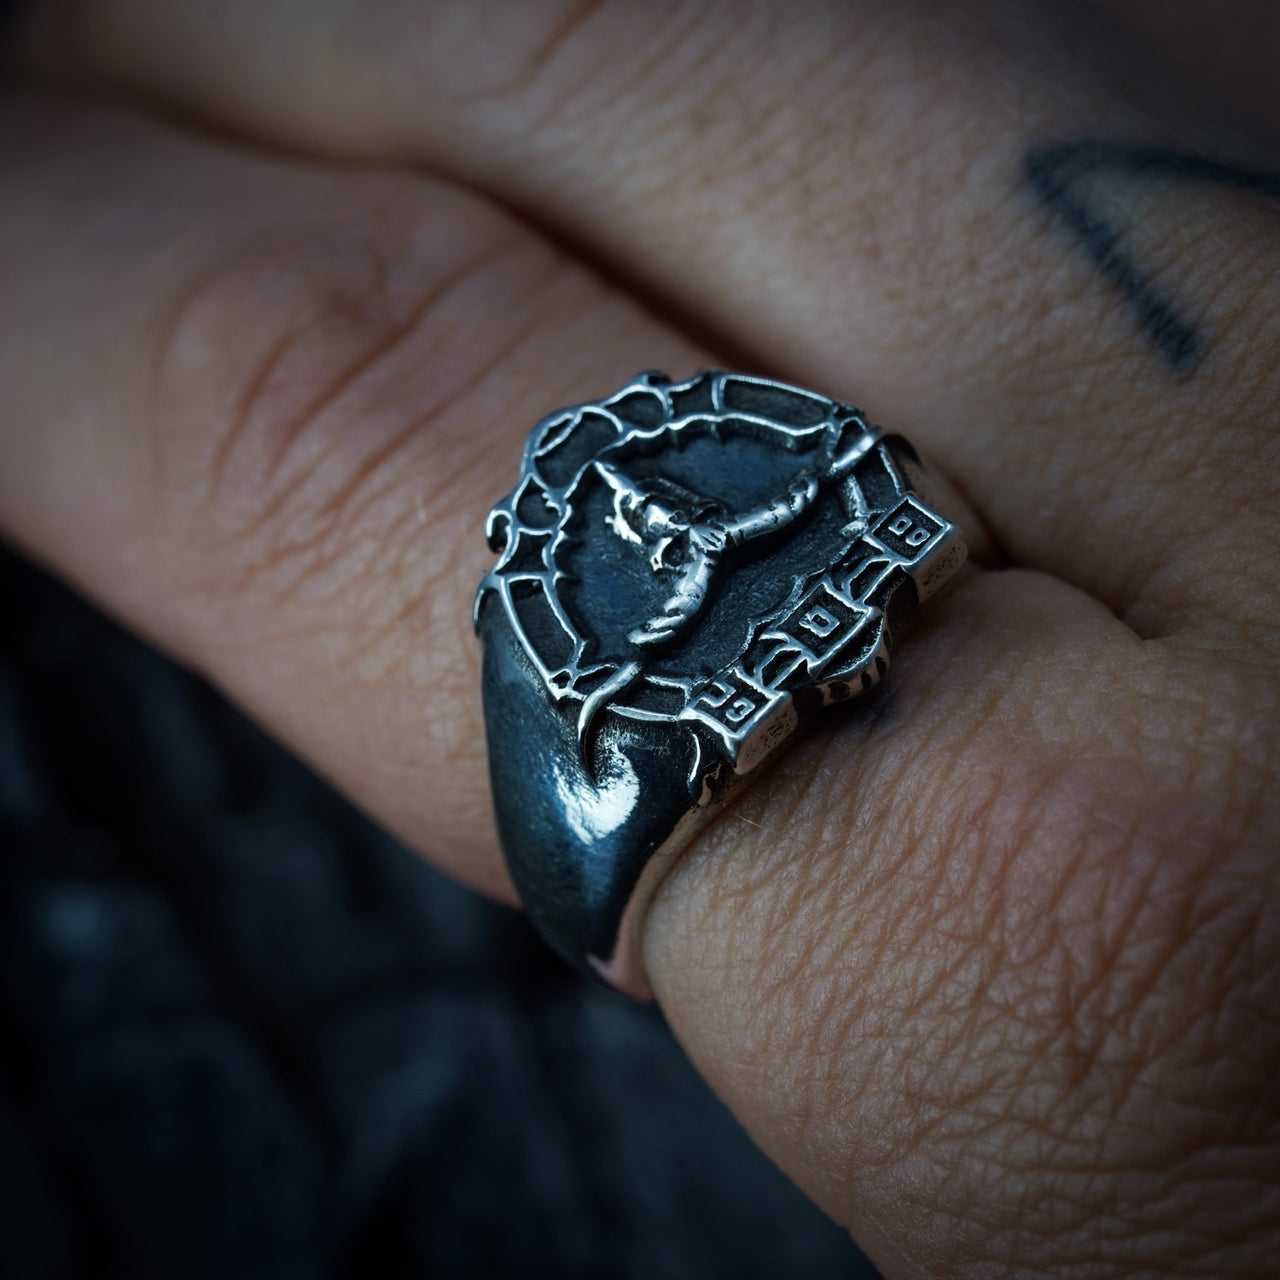 Bloodstock Signet Ring on hand - 925 Silver - Black Feather Design